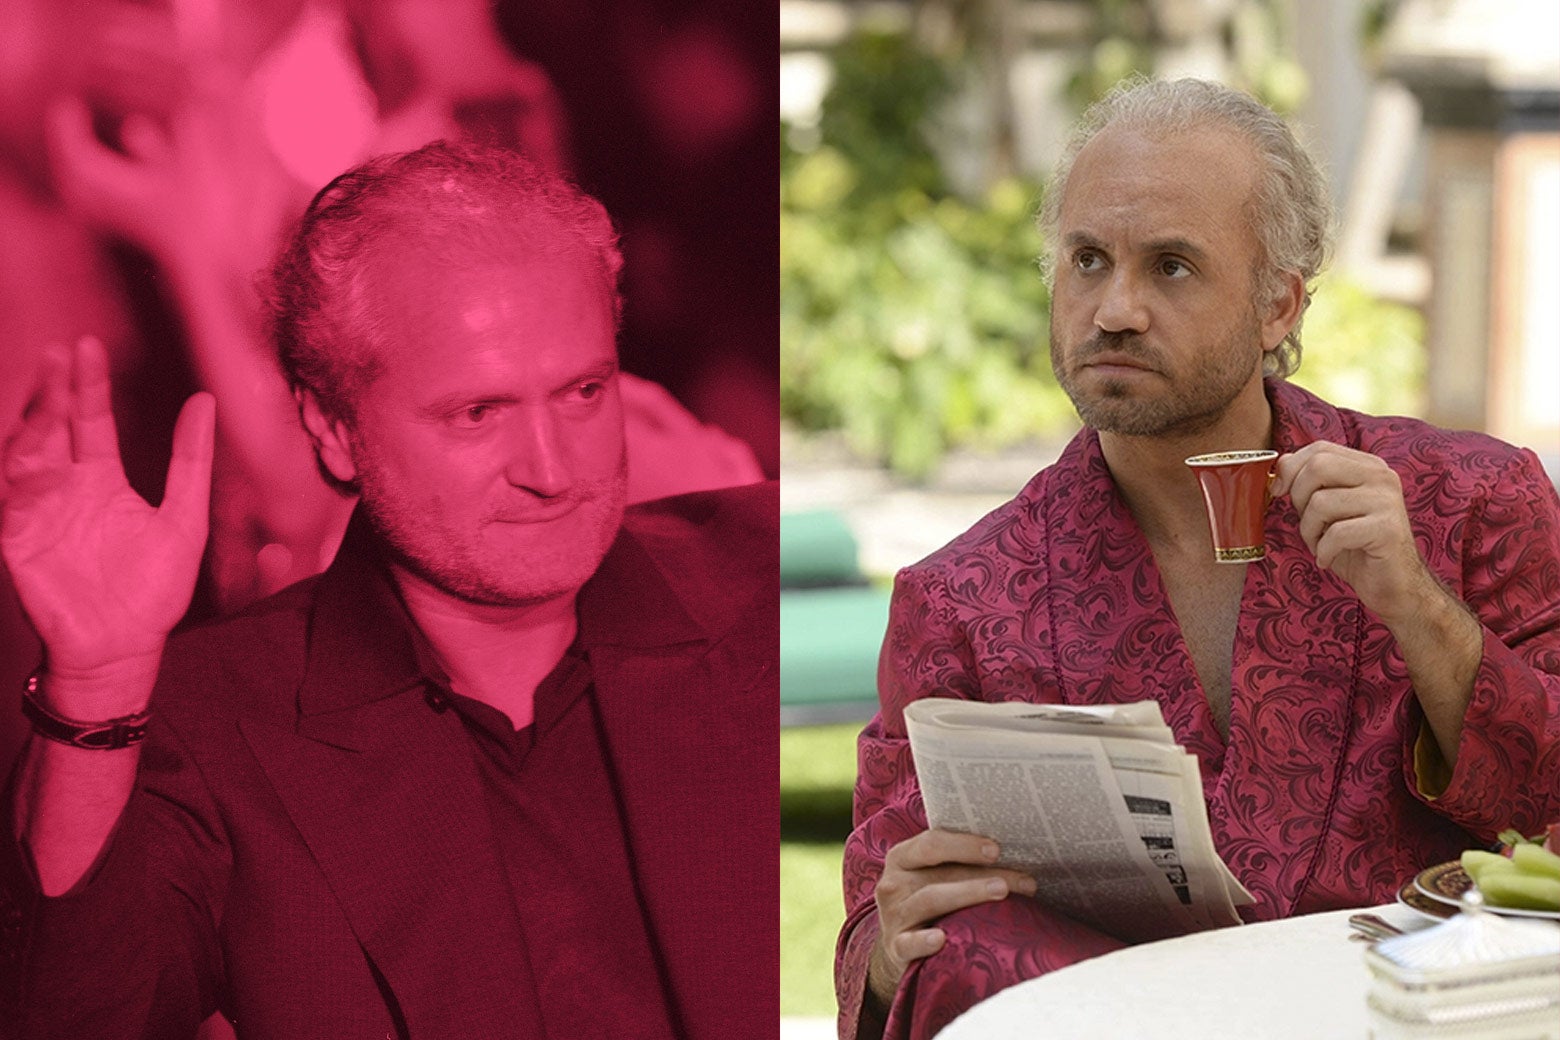 Gianni Versace and Edgar Ramirez playing Versace in The Assassination of Gianni Versace.